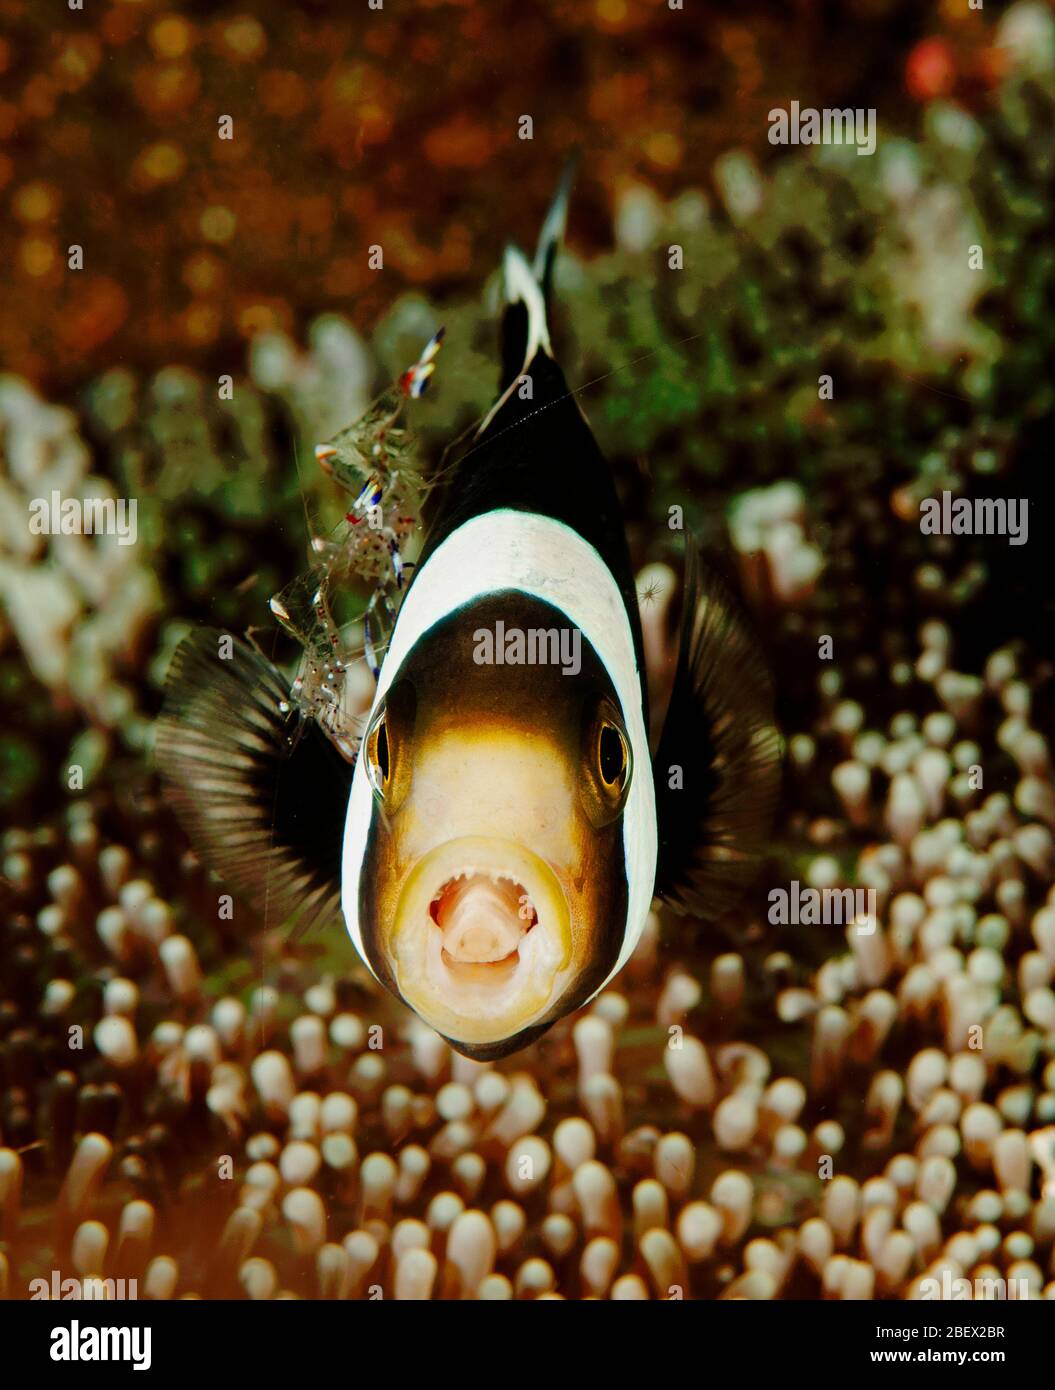 Clark anemonefish, Amphiprion clarkii, and cleaner shrimps, Periclimenes sp. Sulawesi Indonesia Stock Photo